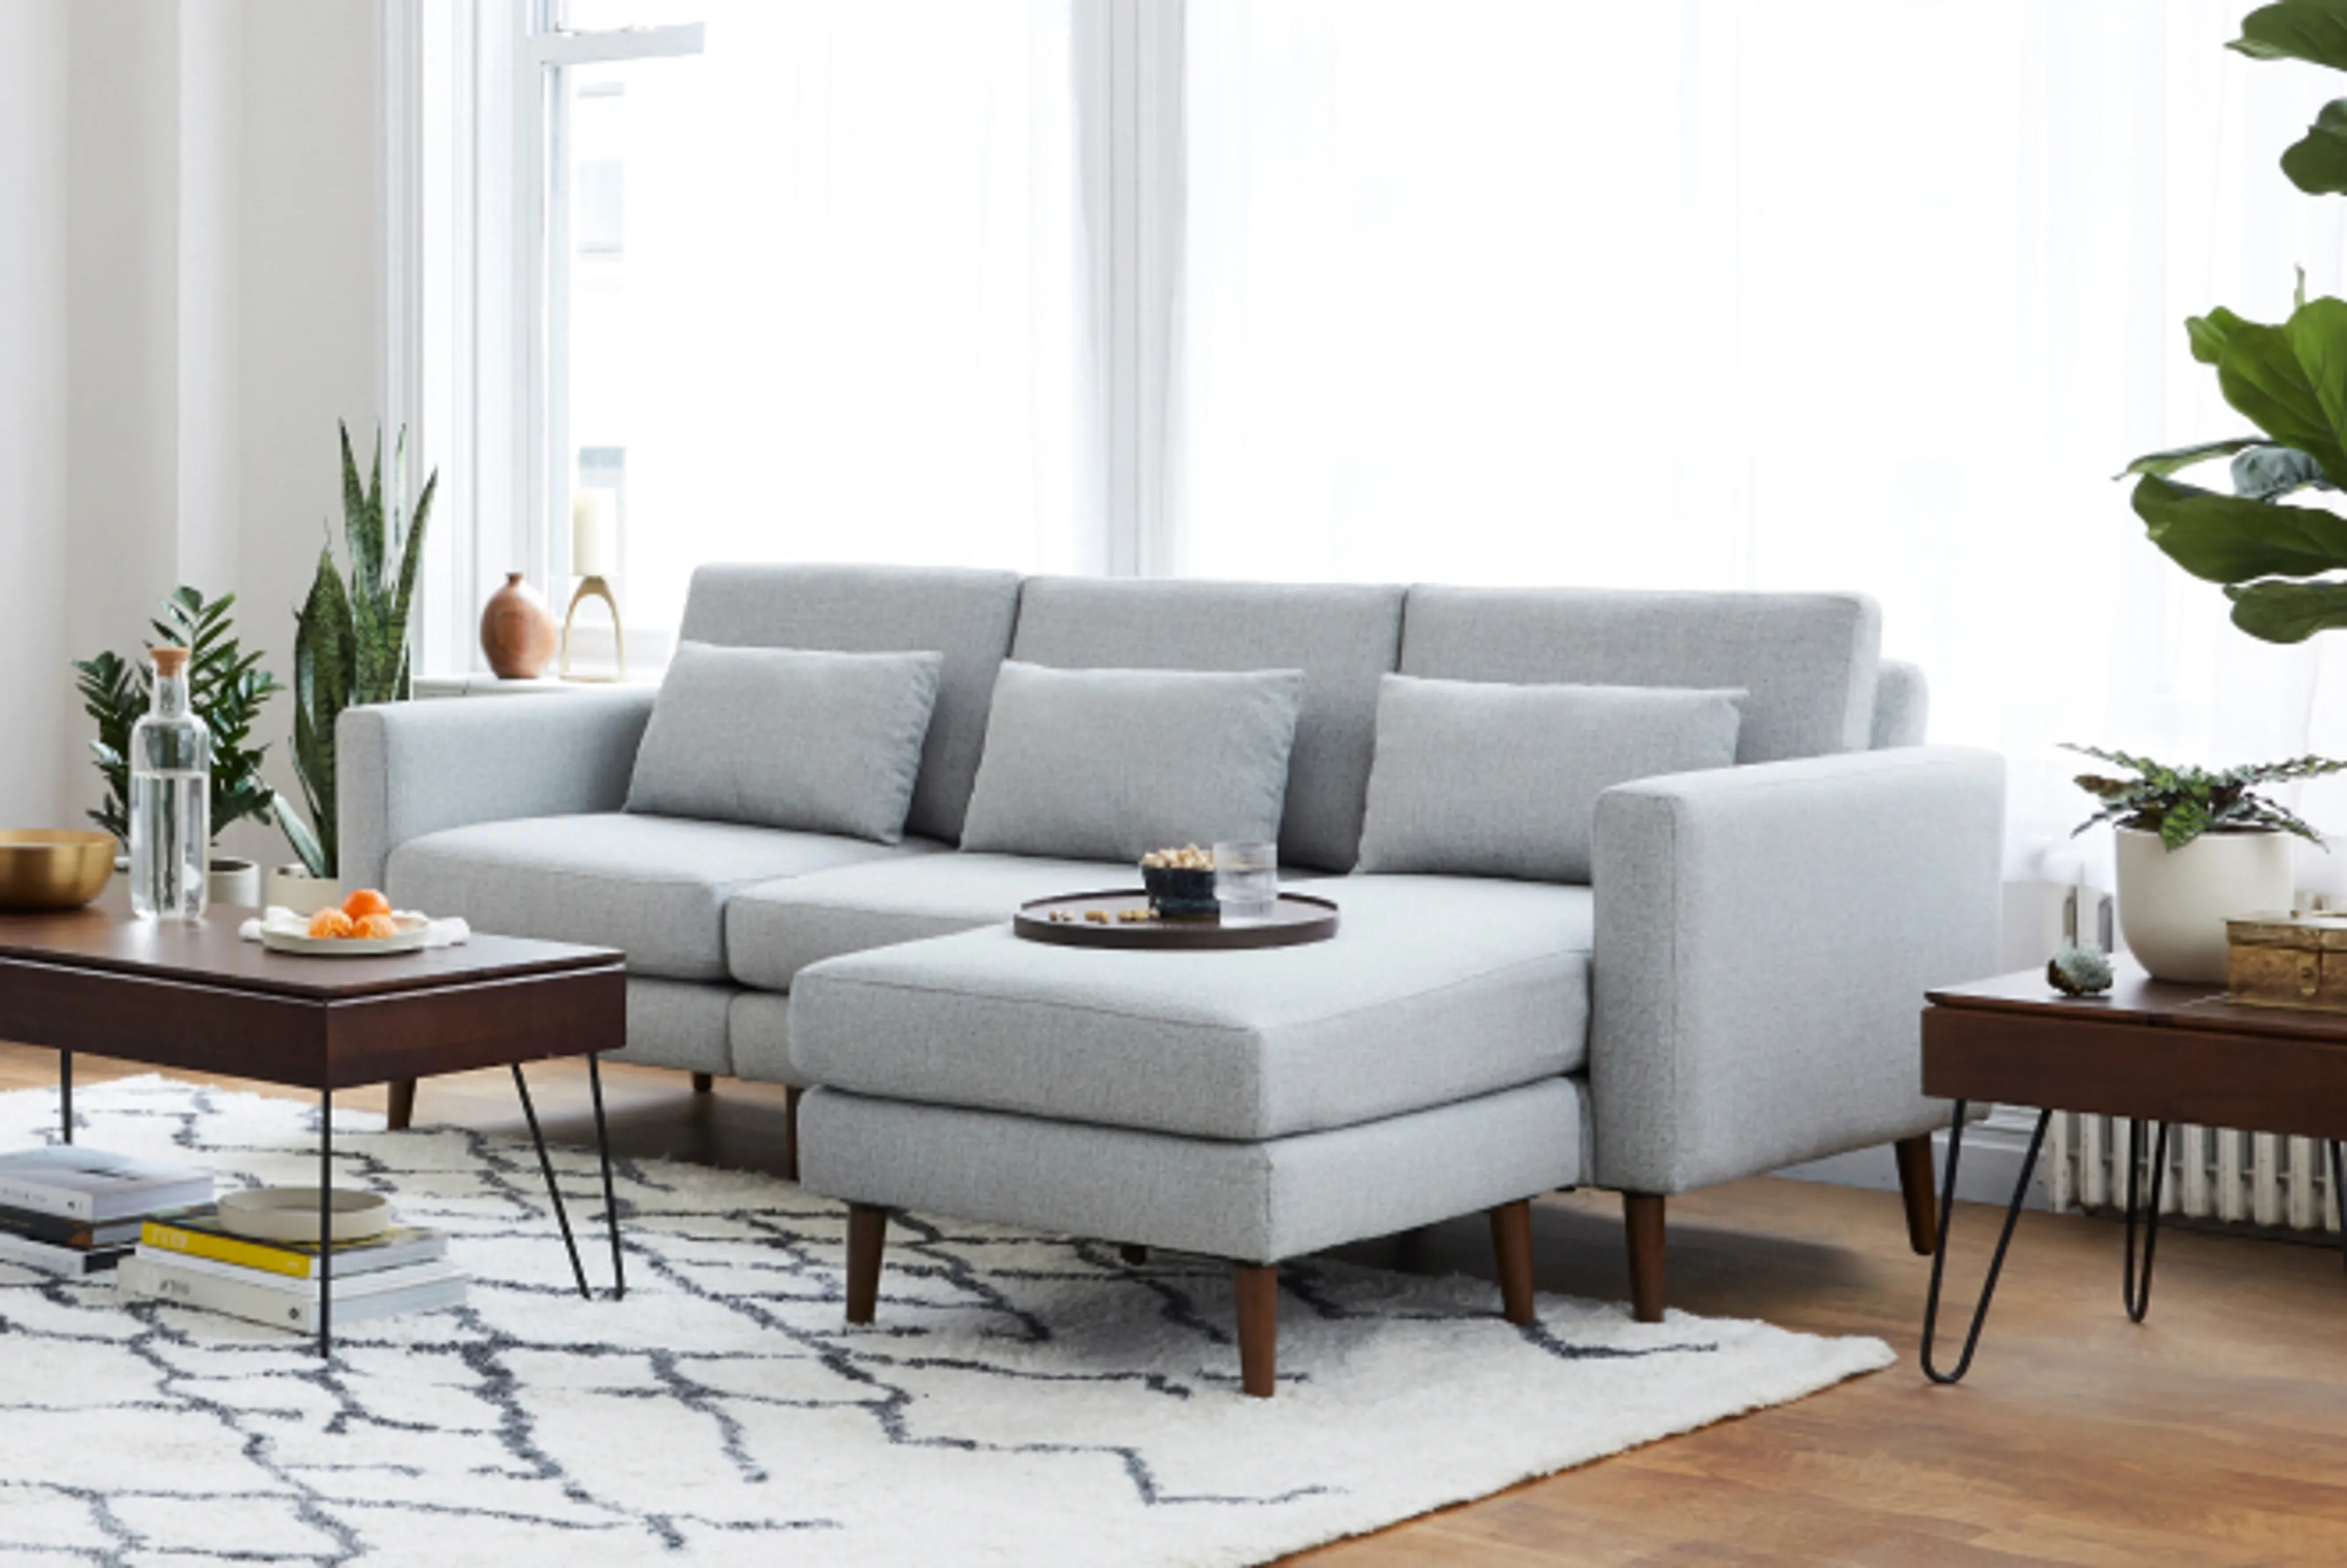 Gray nomad sofa sectional in living room setting with rug, coffee and side table